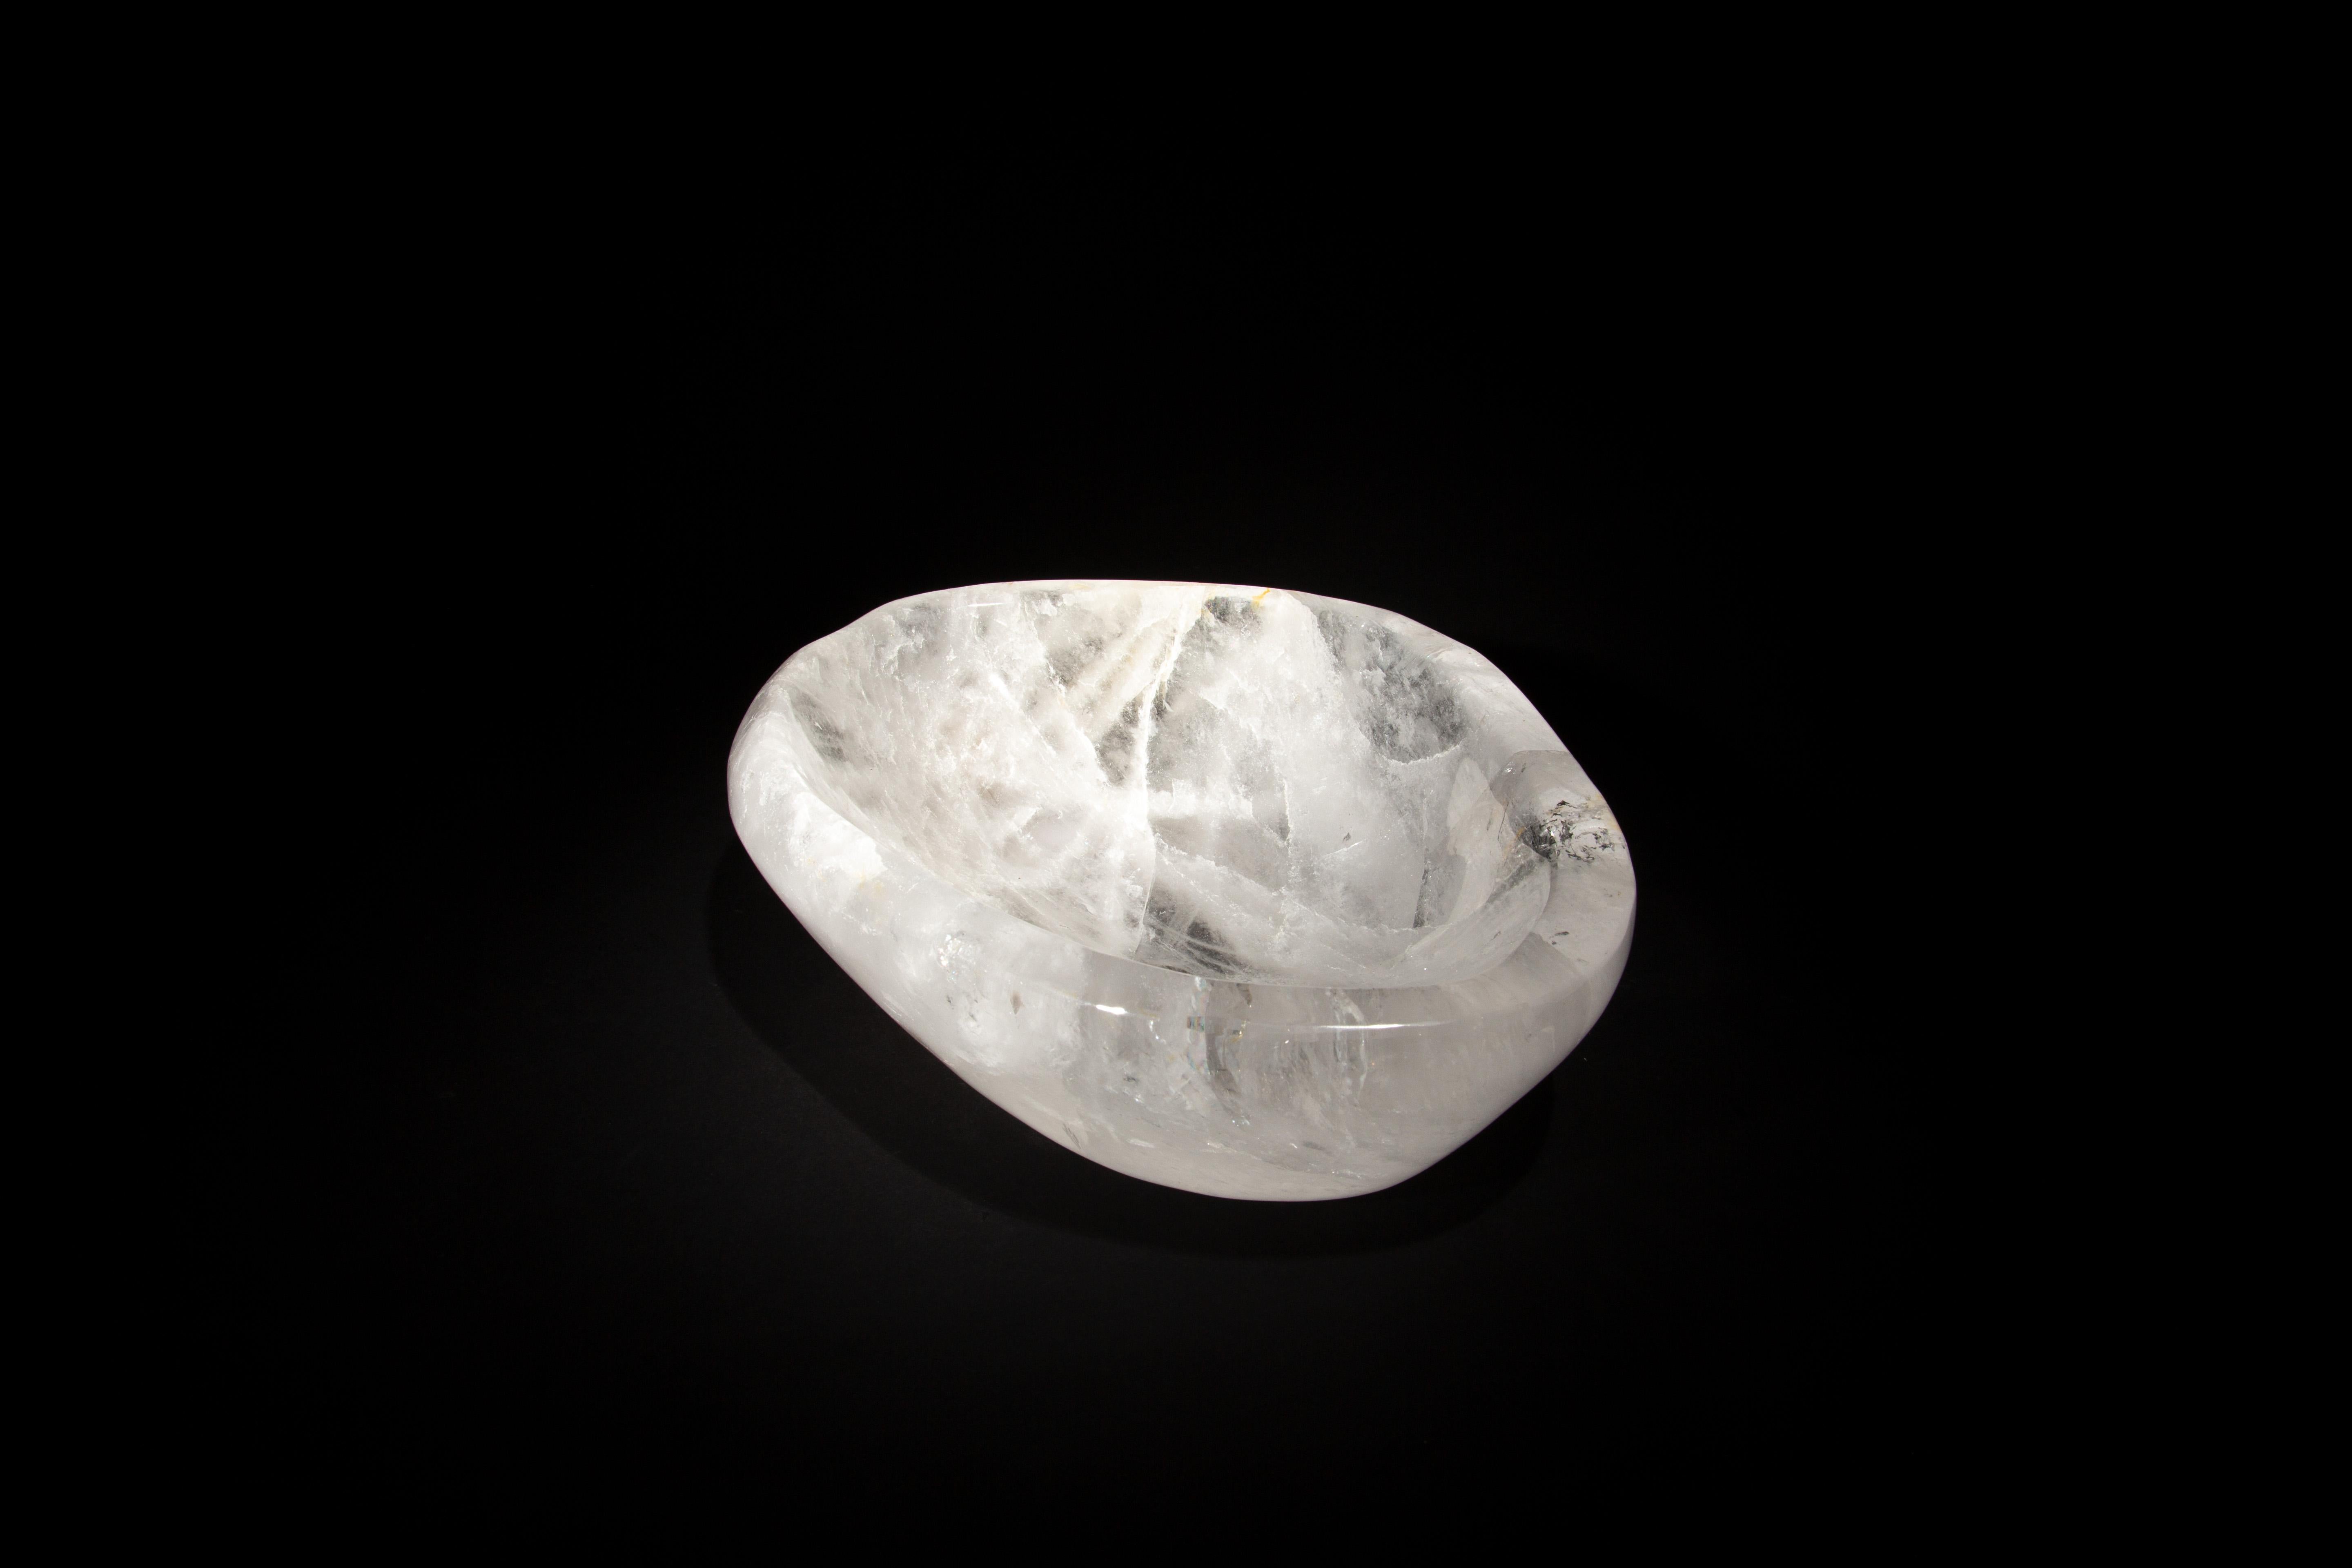 This Rock Crystal Bowl is a masterpiece of natural beauty and exquisite craftsmanship. Measuring 10.5 inches by 8.25 inches with a height of 3 inches, it is meticulously sculpted from pure rock crystal, known for its transparent allure and icy